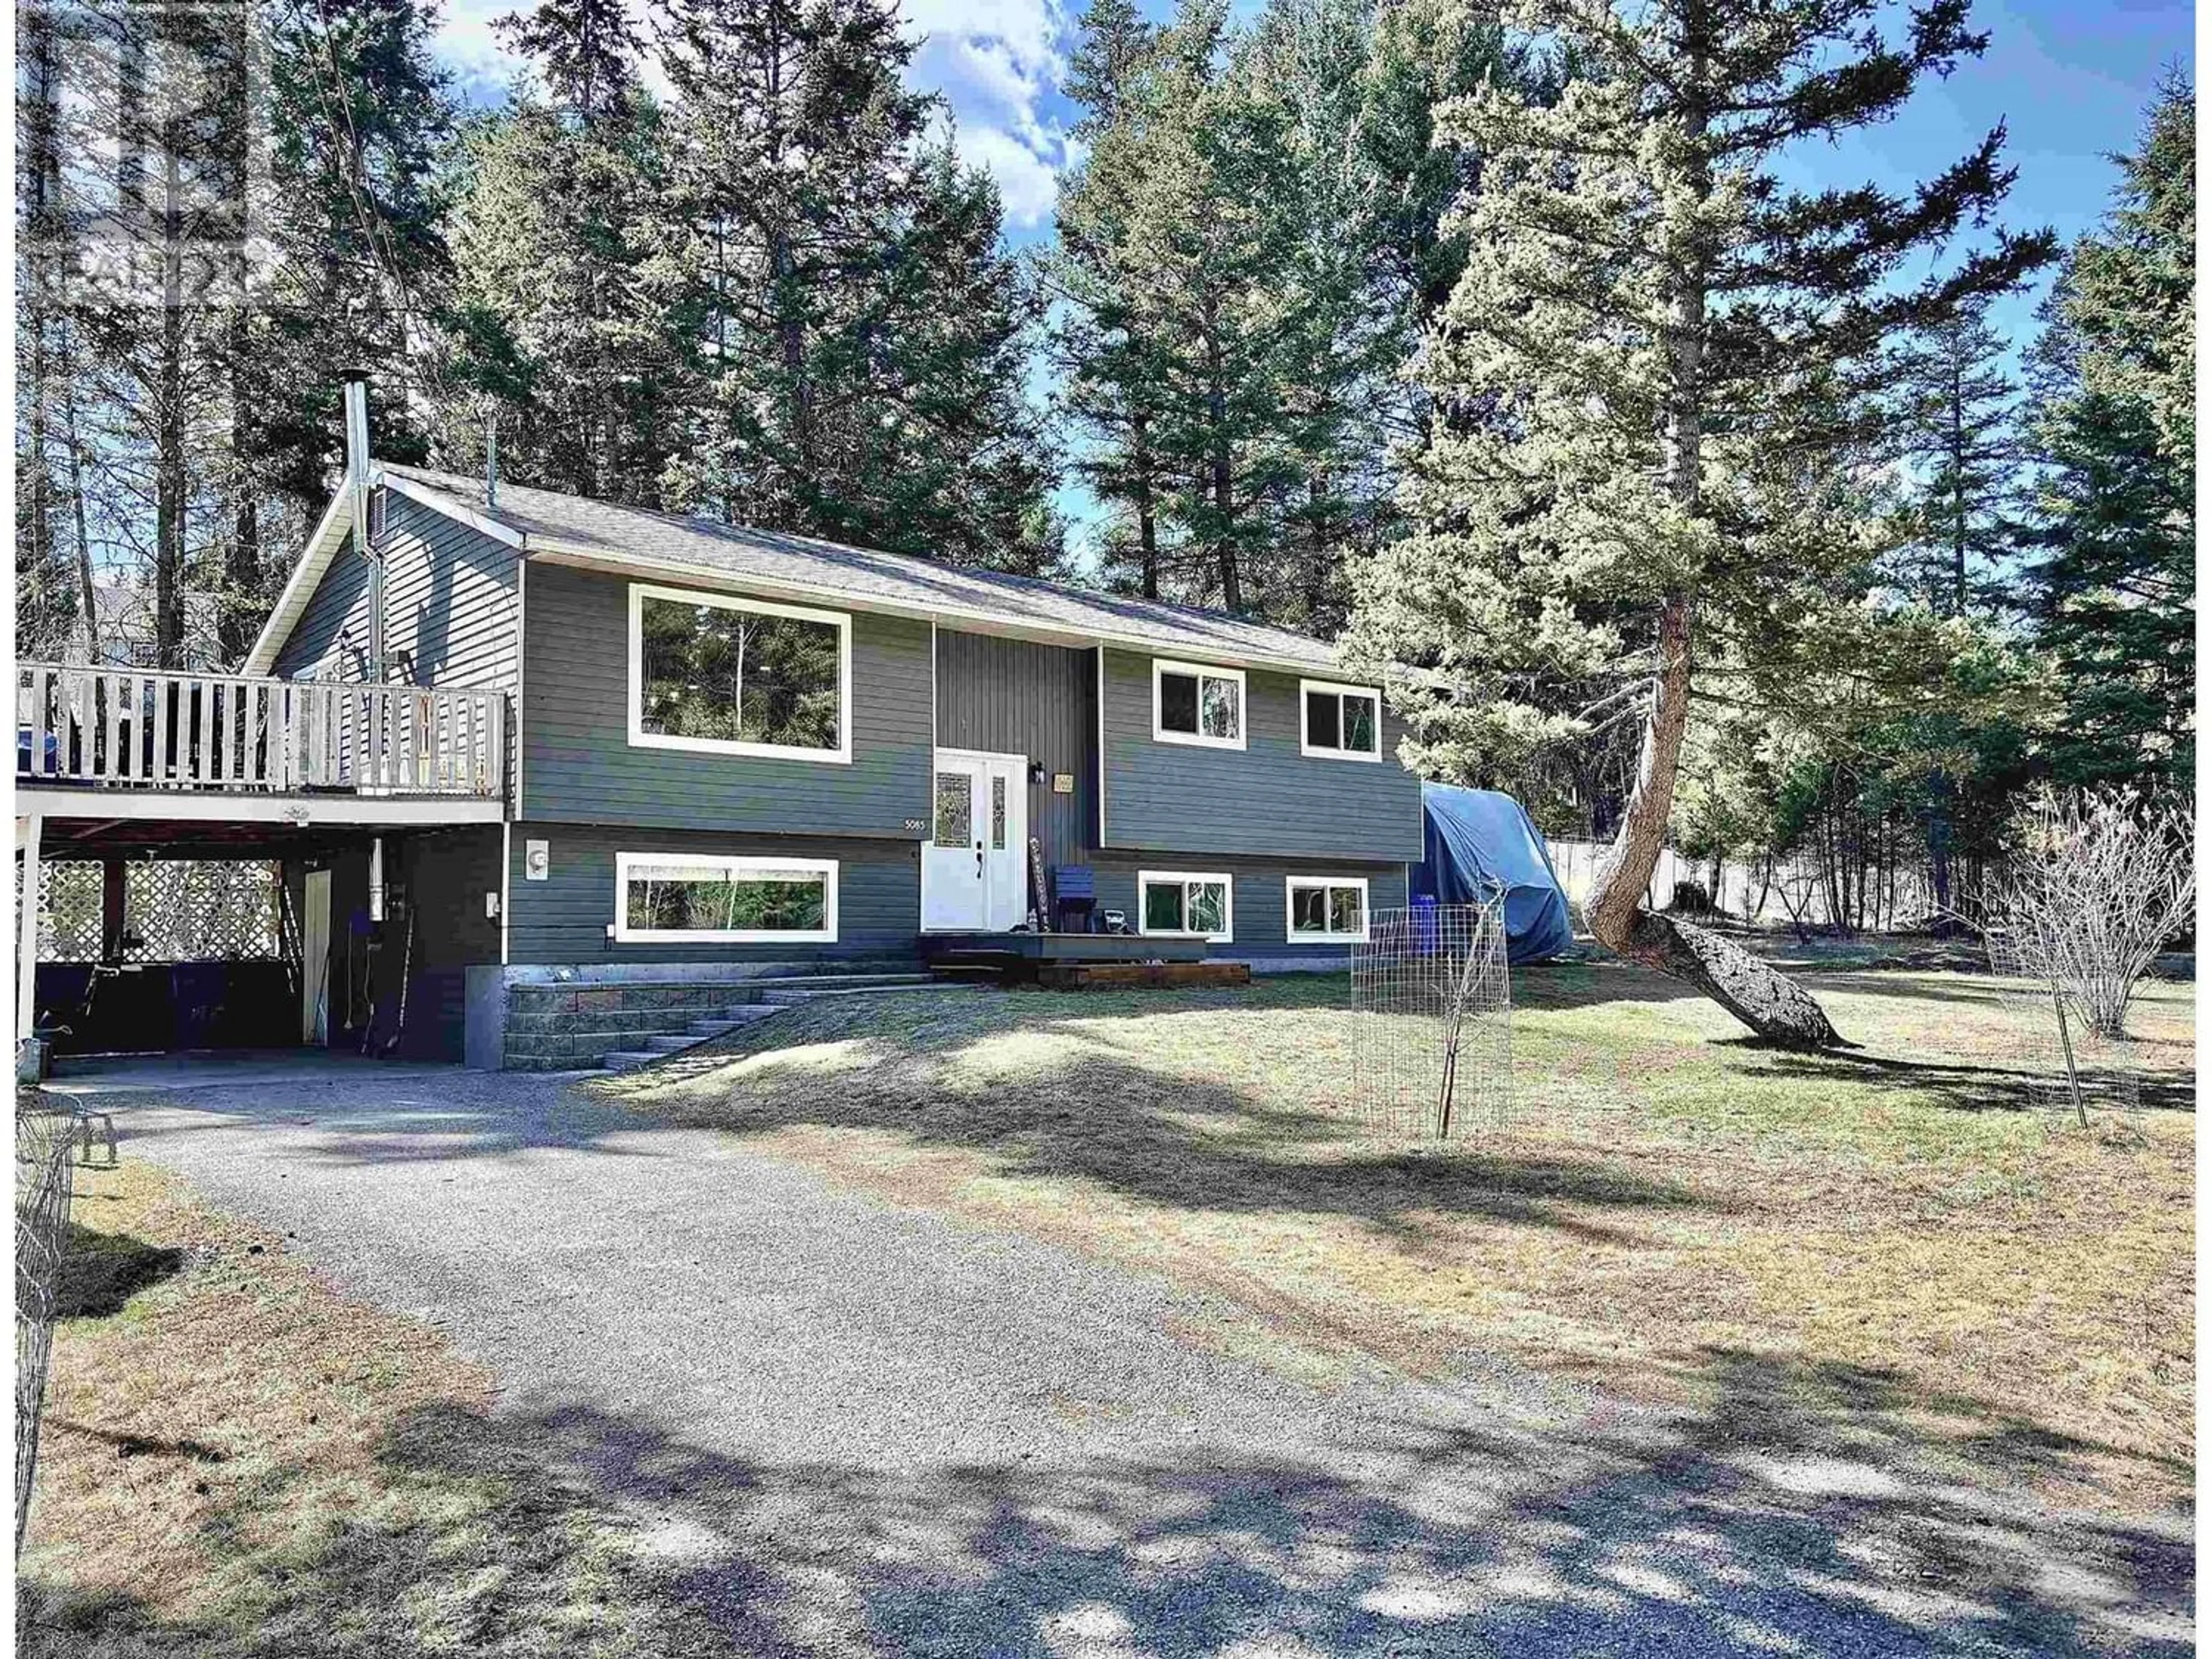 Outside view for 5085 EASZEE DRIVE, 108 Mile Ranch British Columbia V0K2Z0